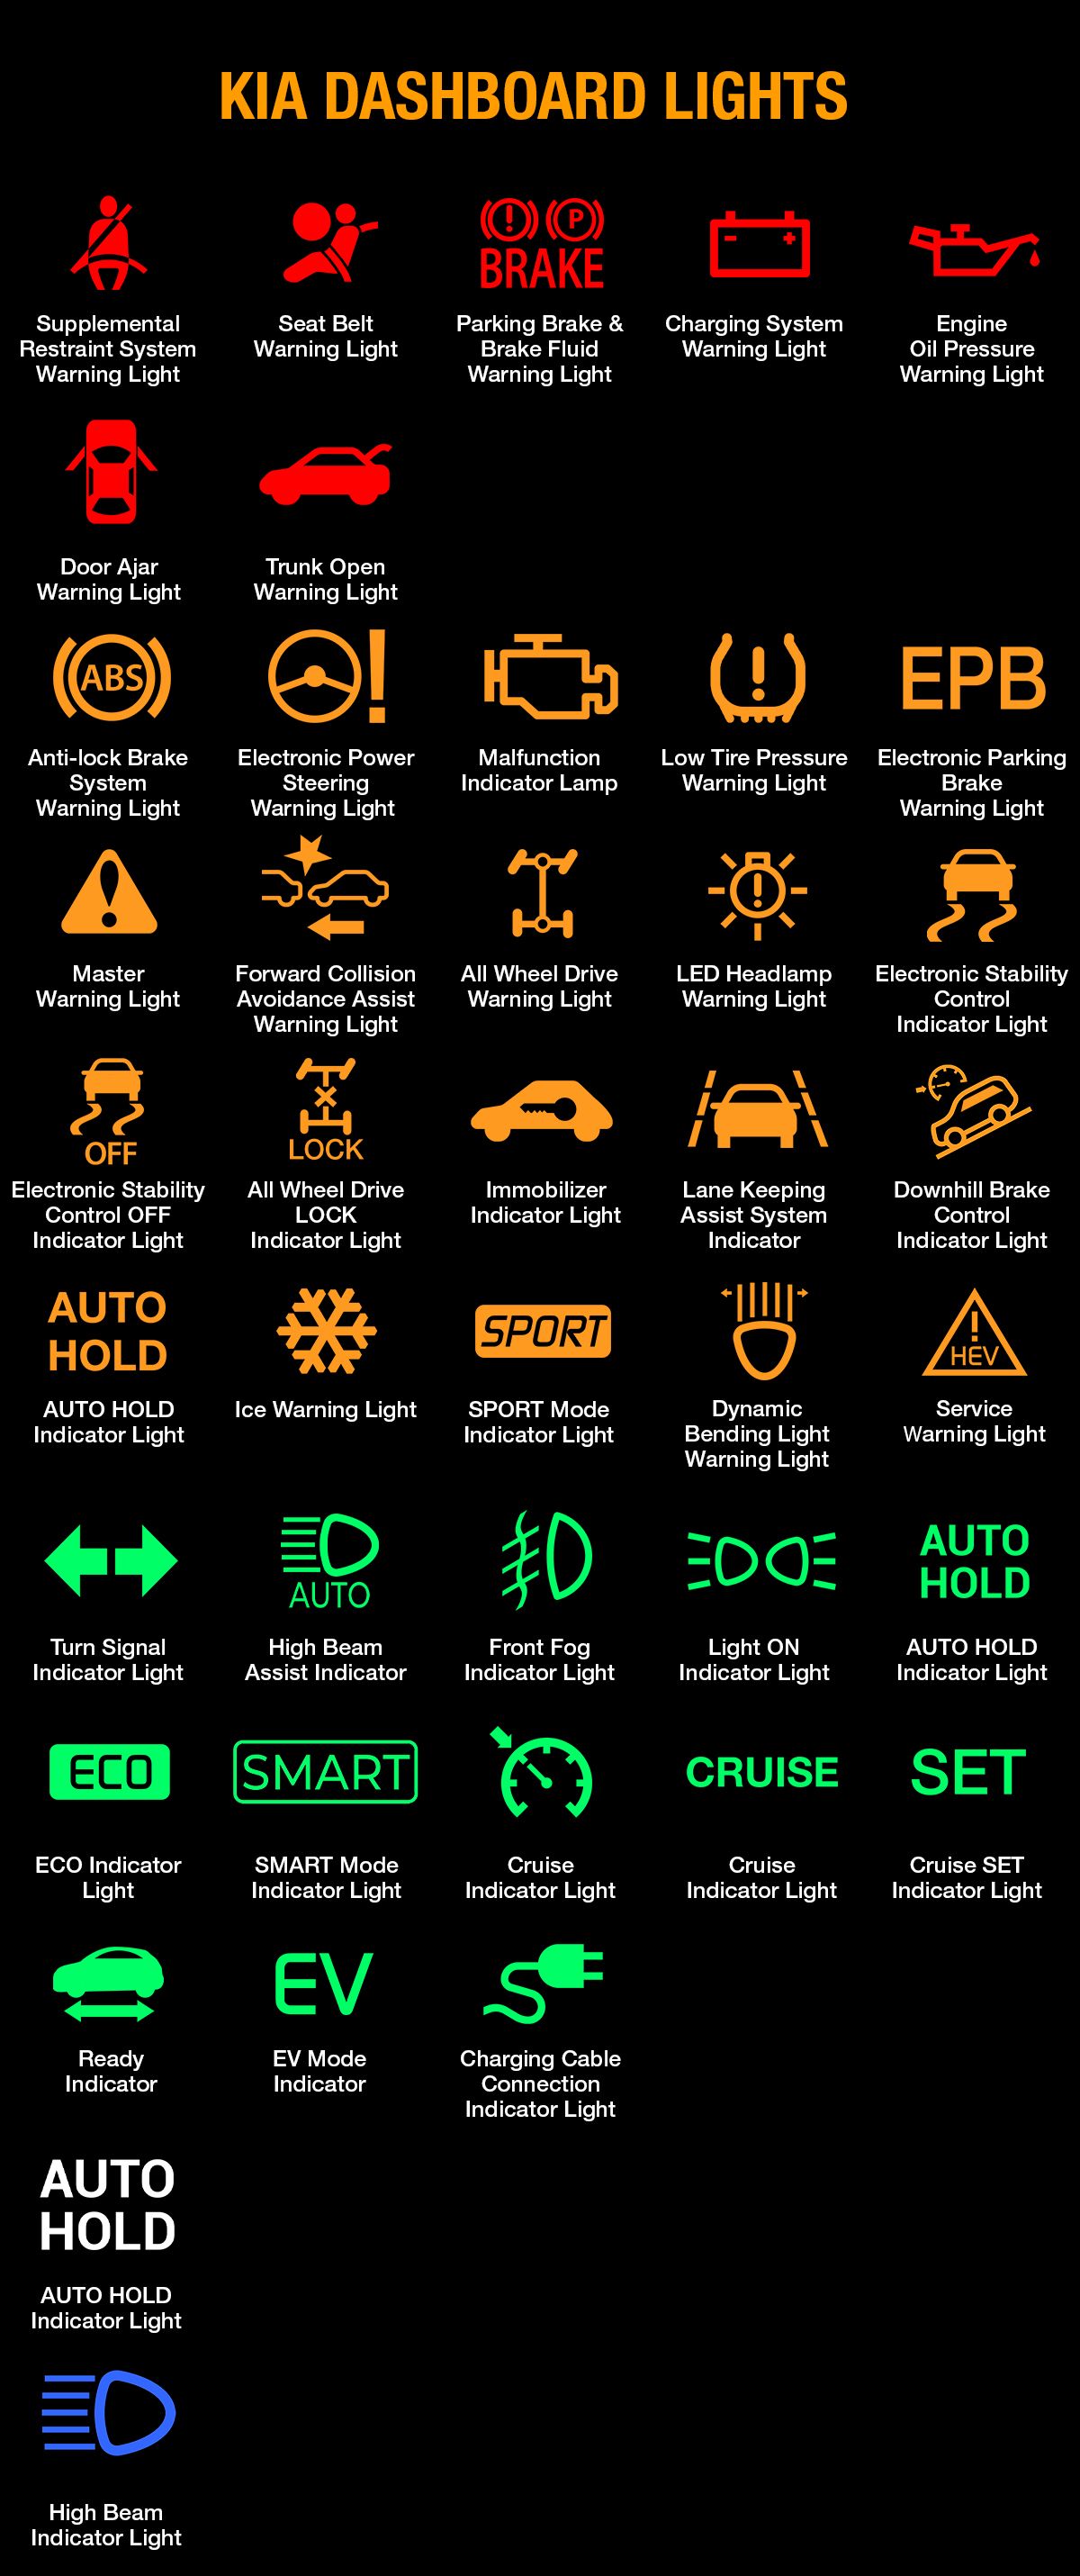 Kia Warning Light Symbols And Meanings Full List Free Download